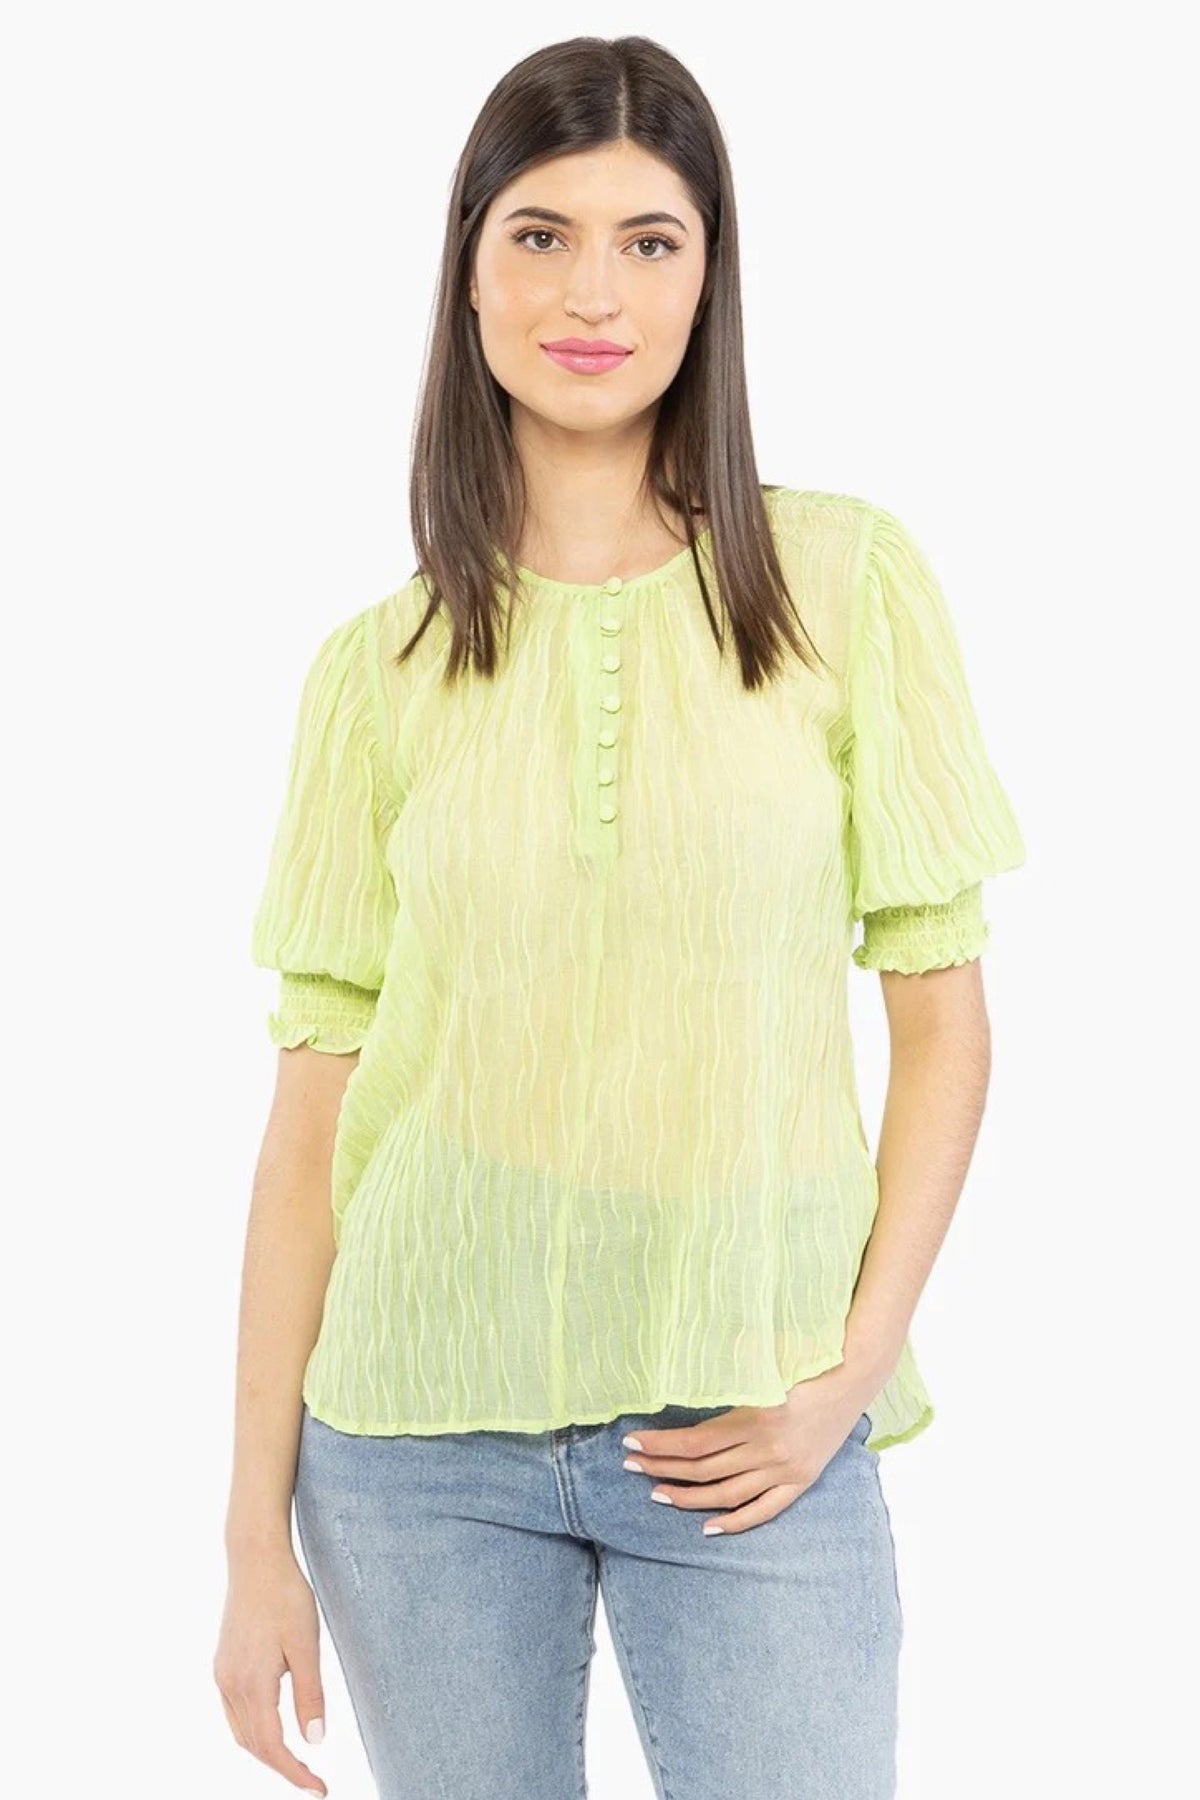 Brixton Top Lime